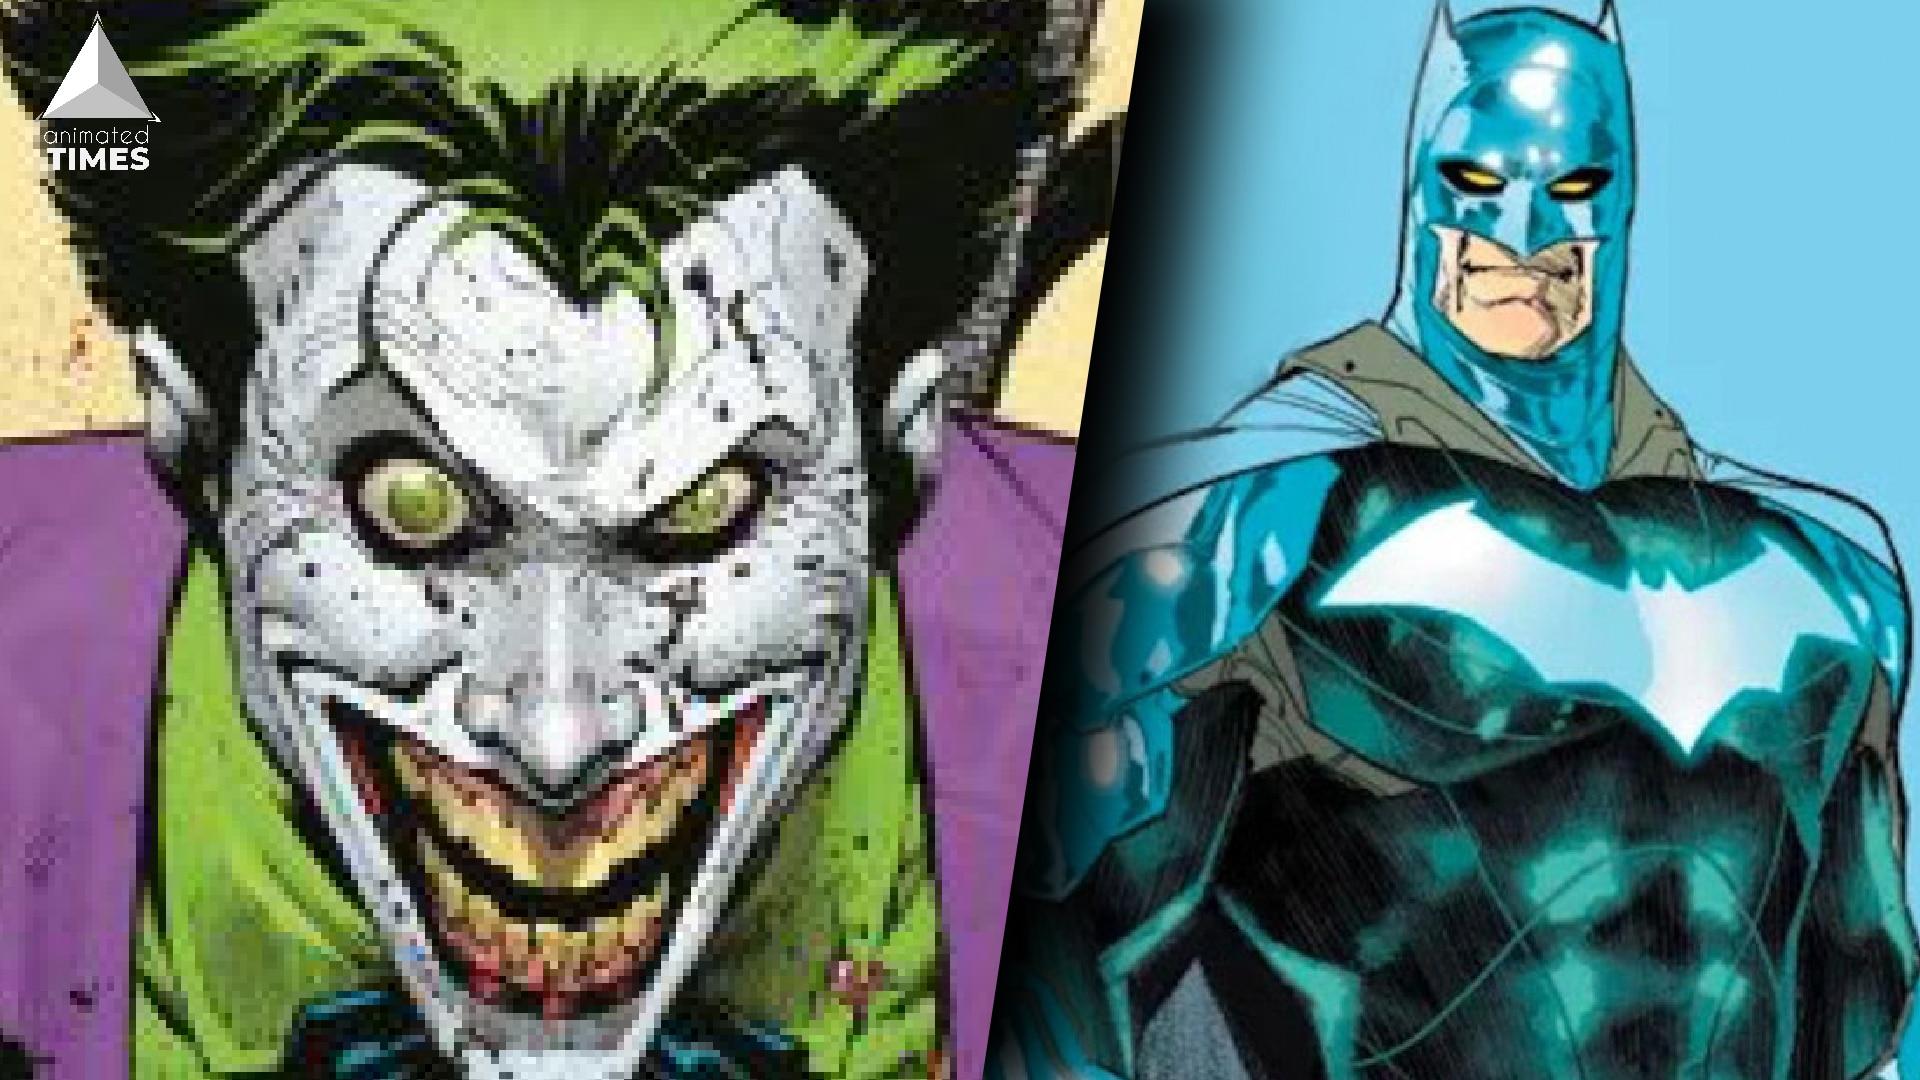 Batman Comes Up With All New Costume in DC Comics